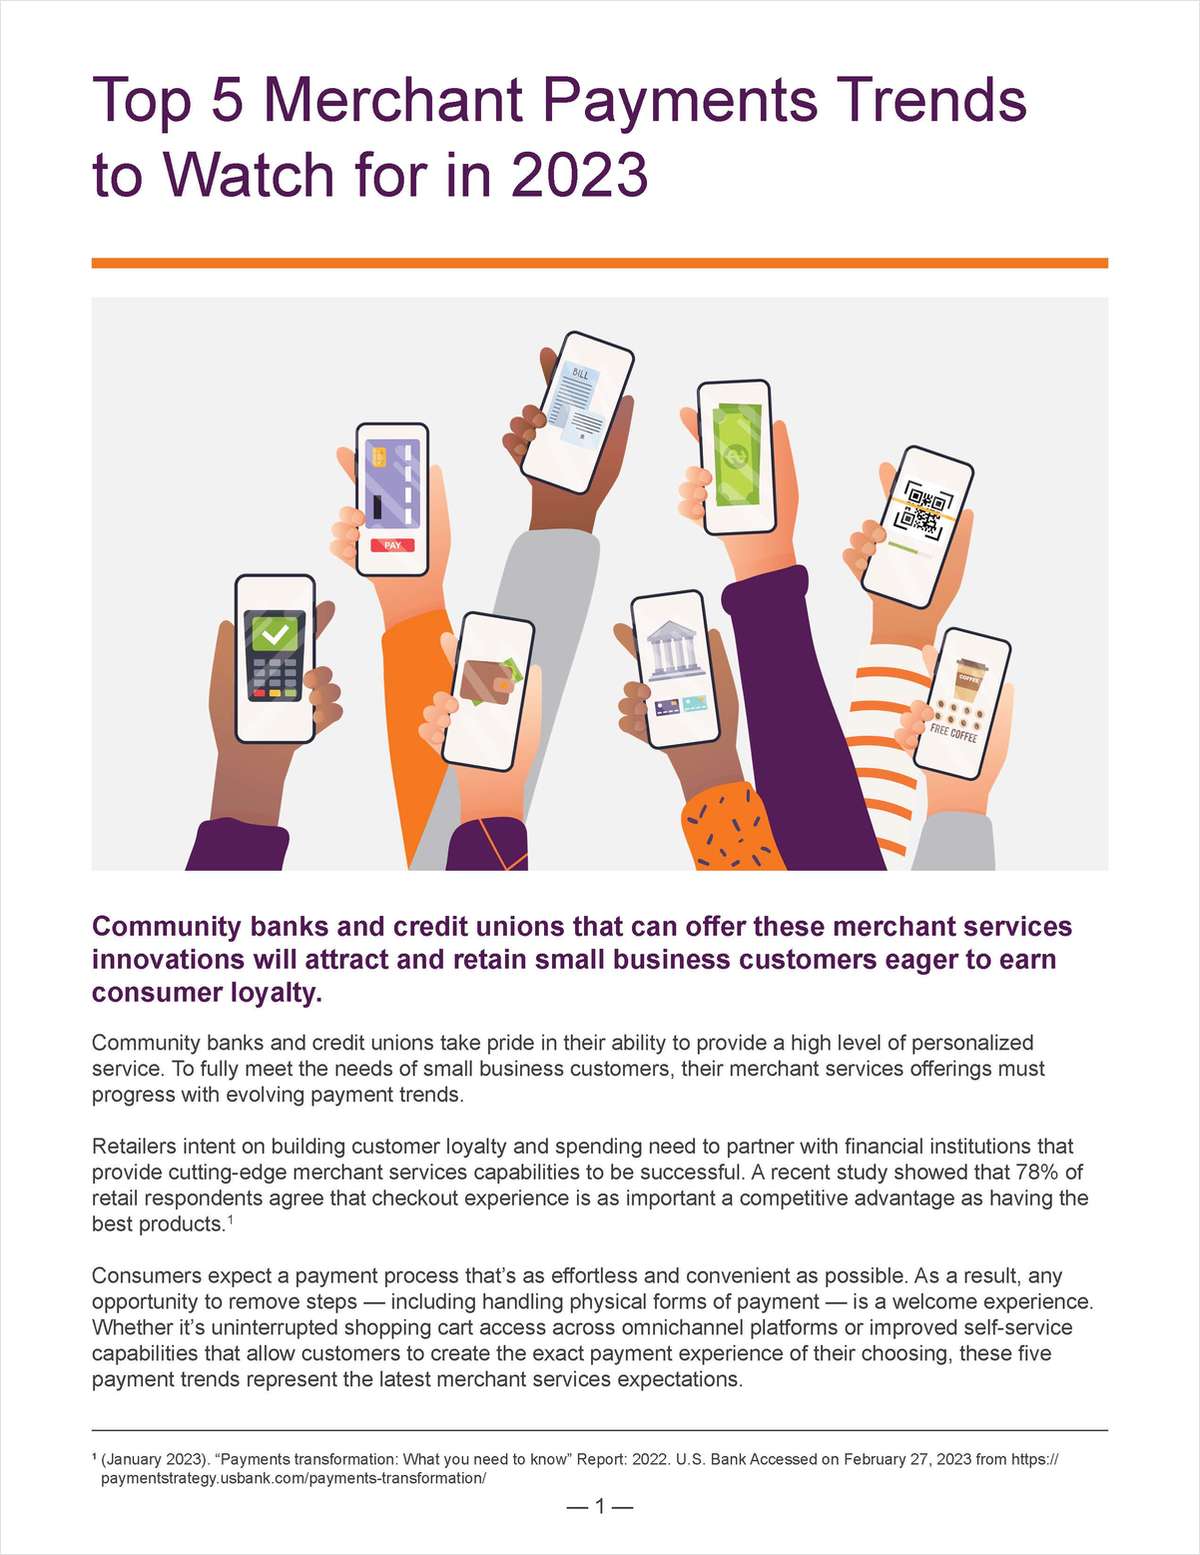 Top 5 Merchant Payments Trends to Watch for in 2023 link